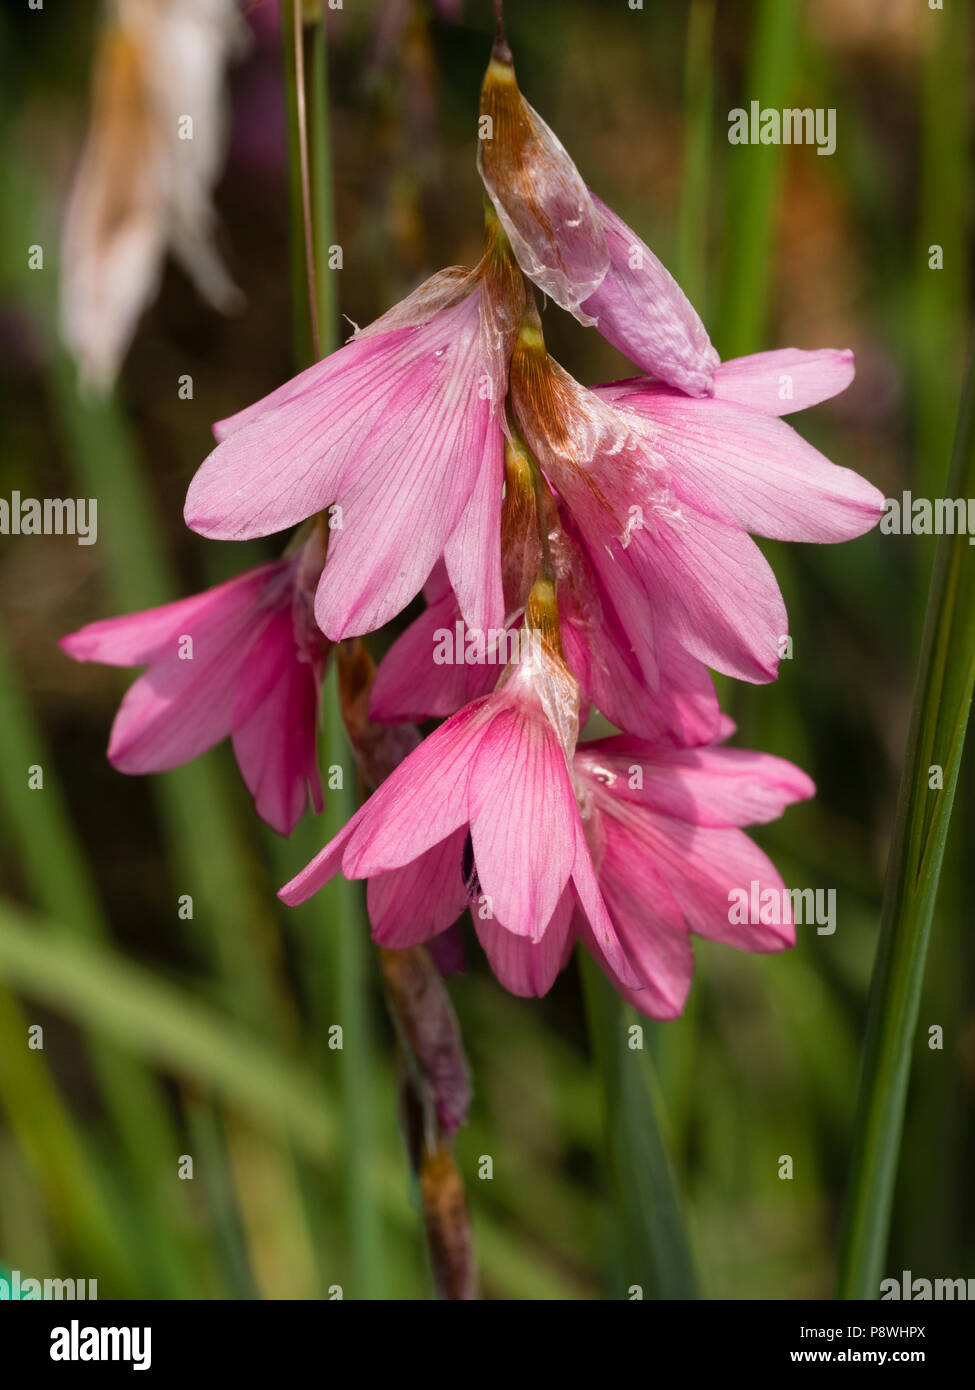 Dangling pink flowers of the hardy angel's fishing rod, Dierama 'Pink Ballerina' Stock Photo